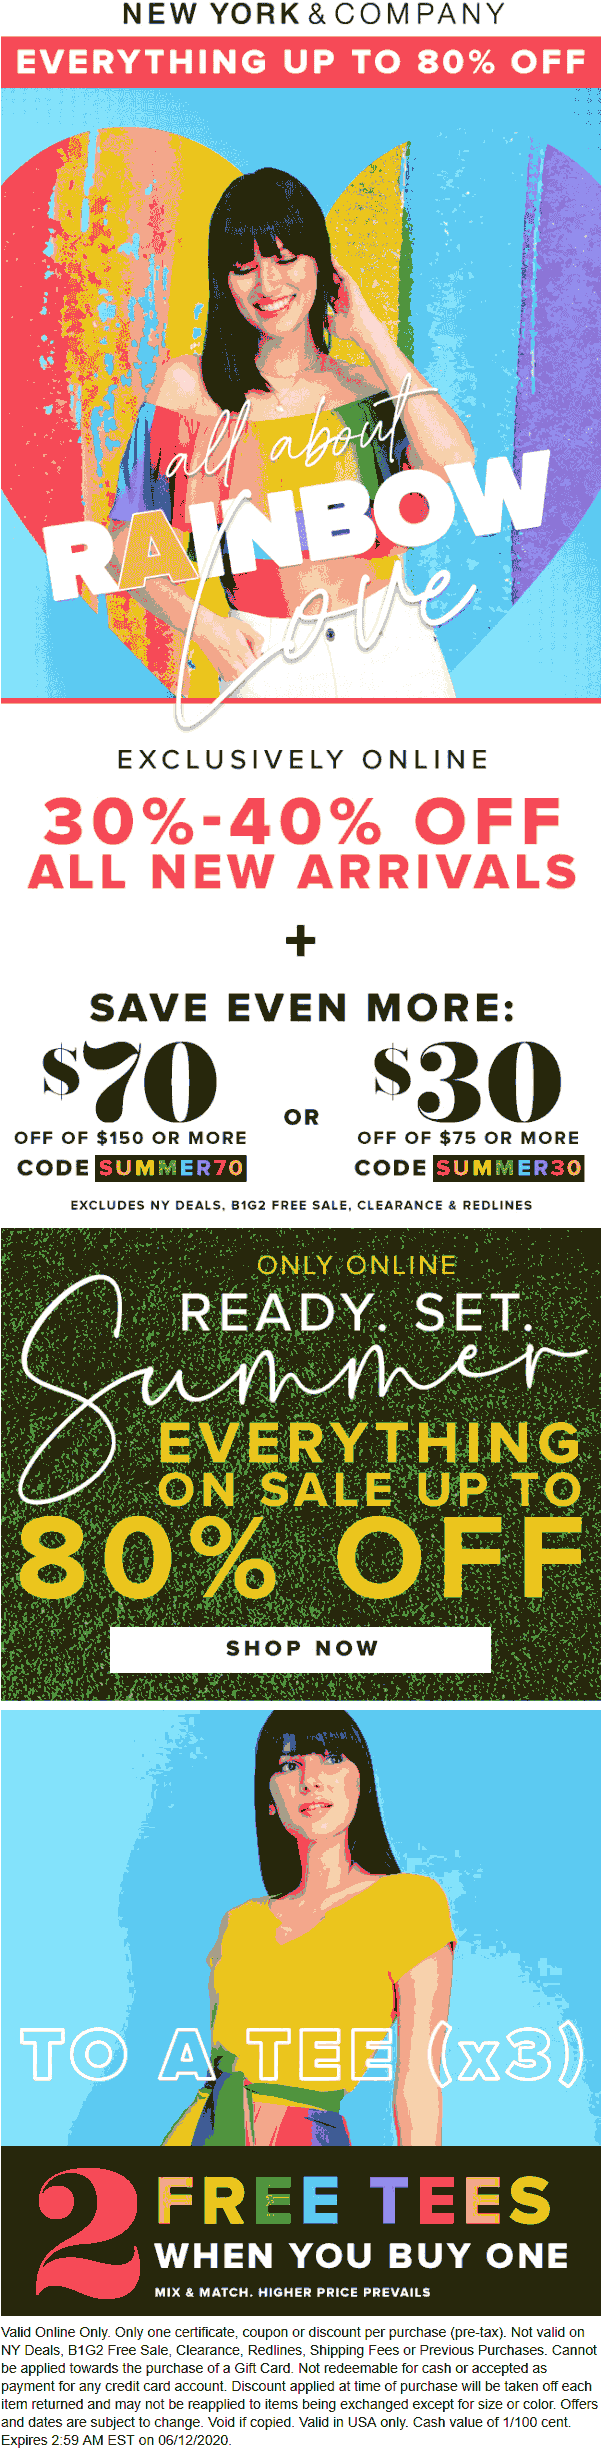 30 off 75 & more today at New York & Company via promo code SUMMER30